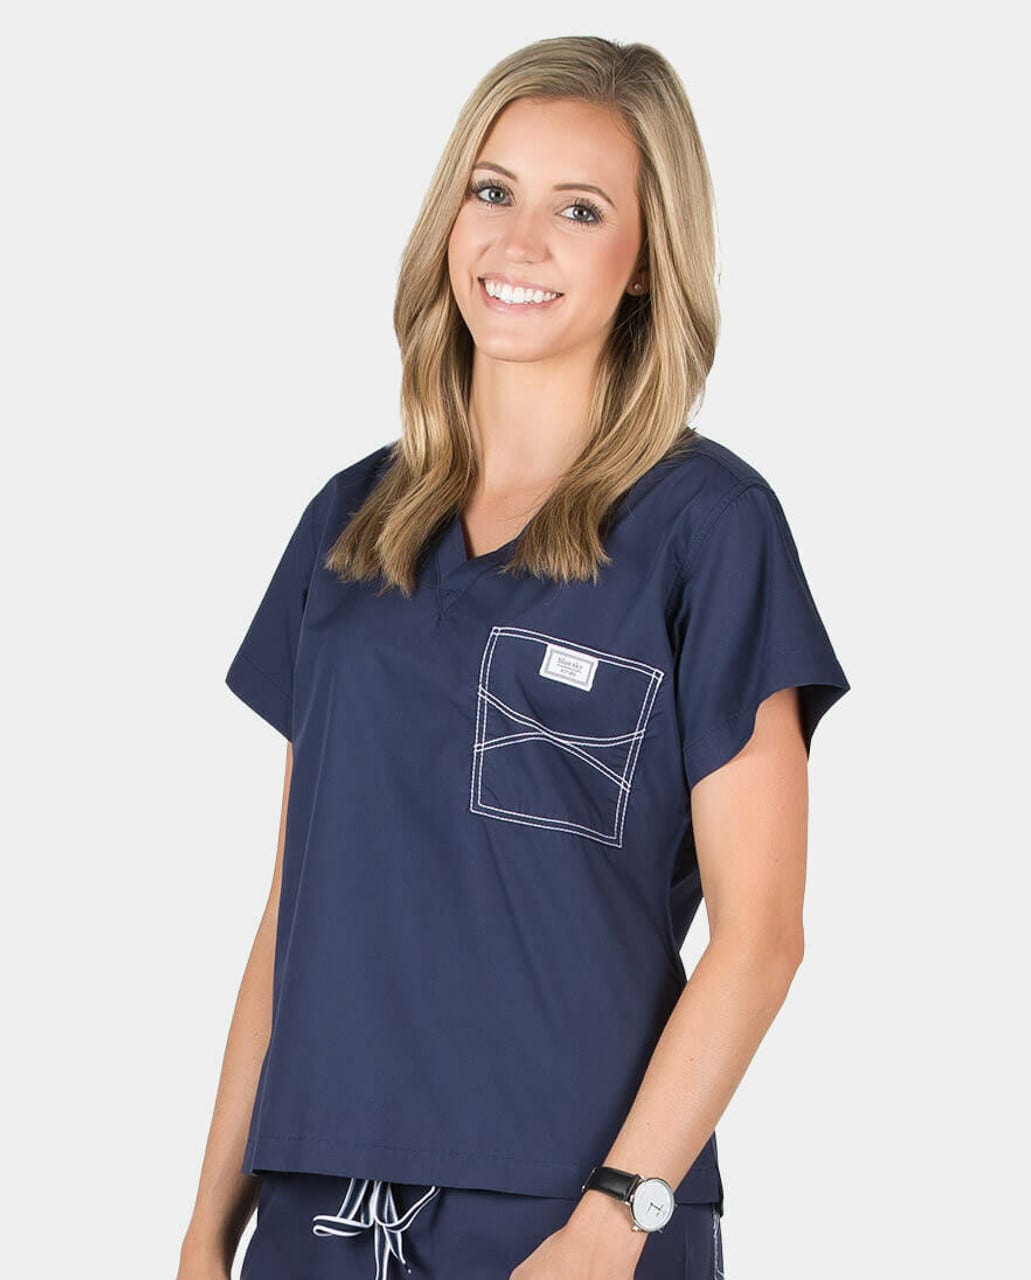 BlueSkyScrubs Presents the Latest Medical Scrubs for Women to Explore, by  bluesky